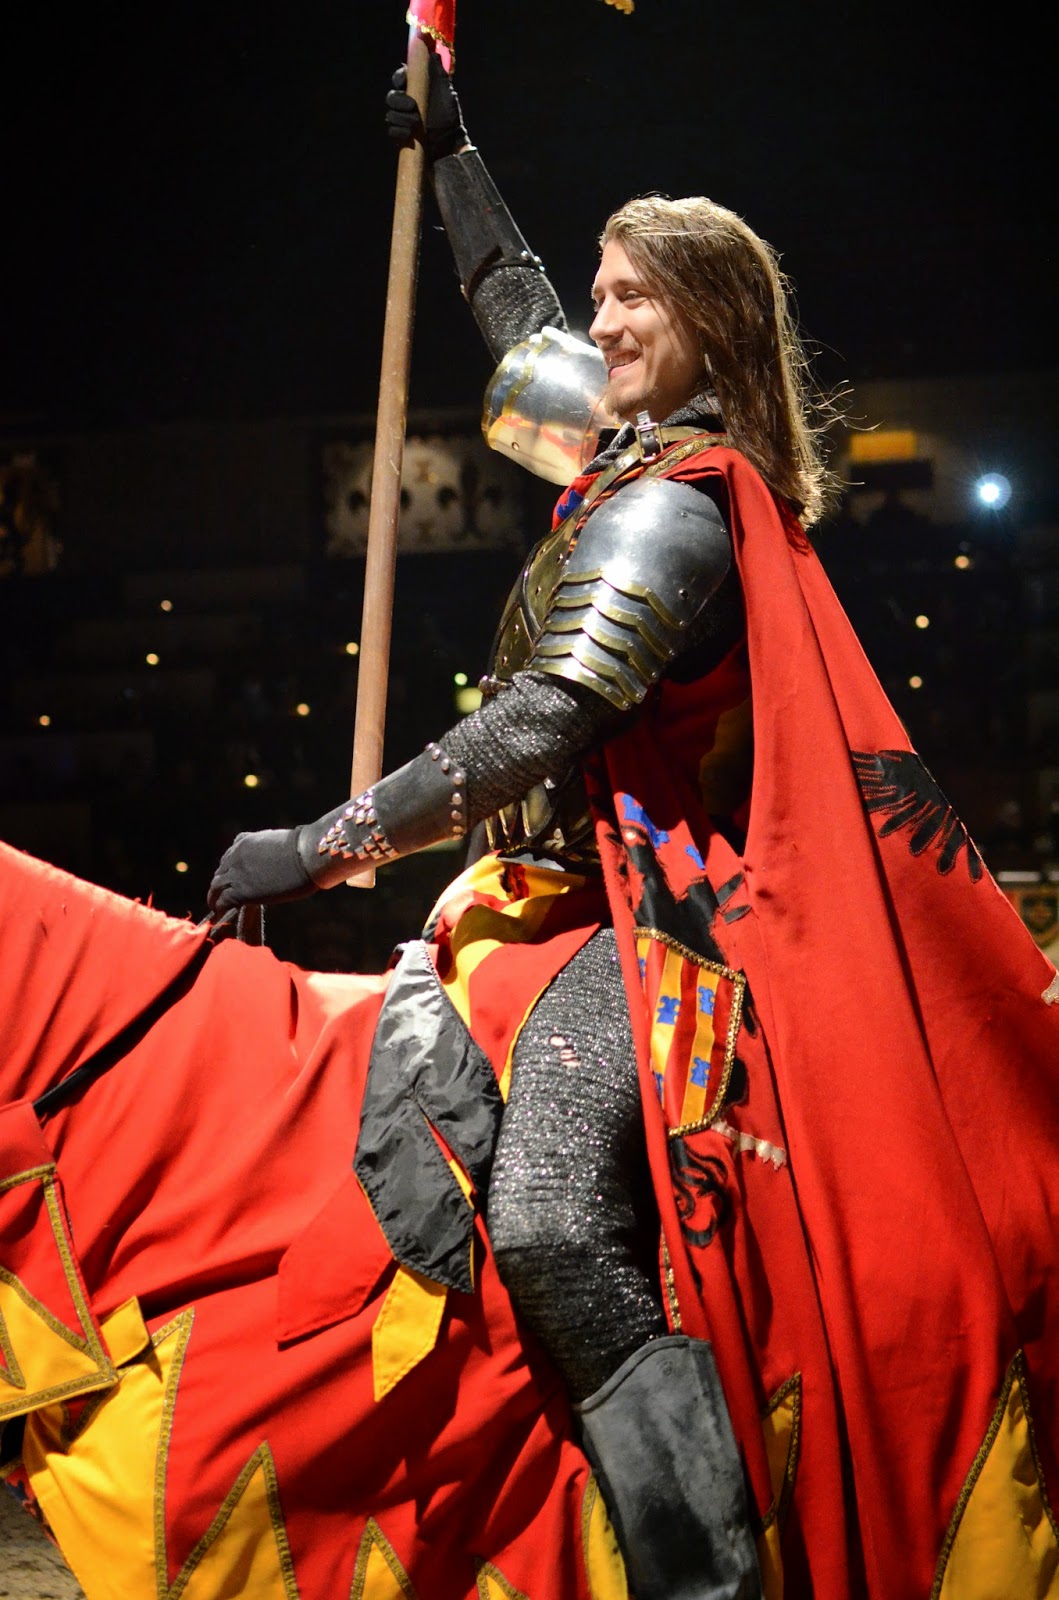 Dainty Warrior: A Royal Time at Medieval Times